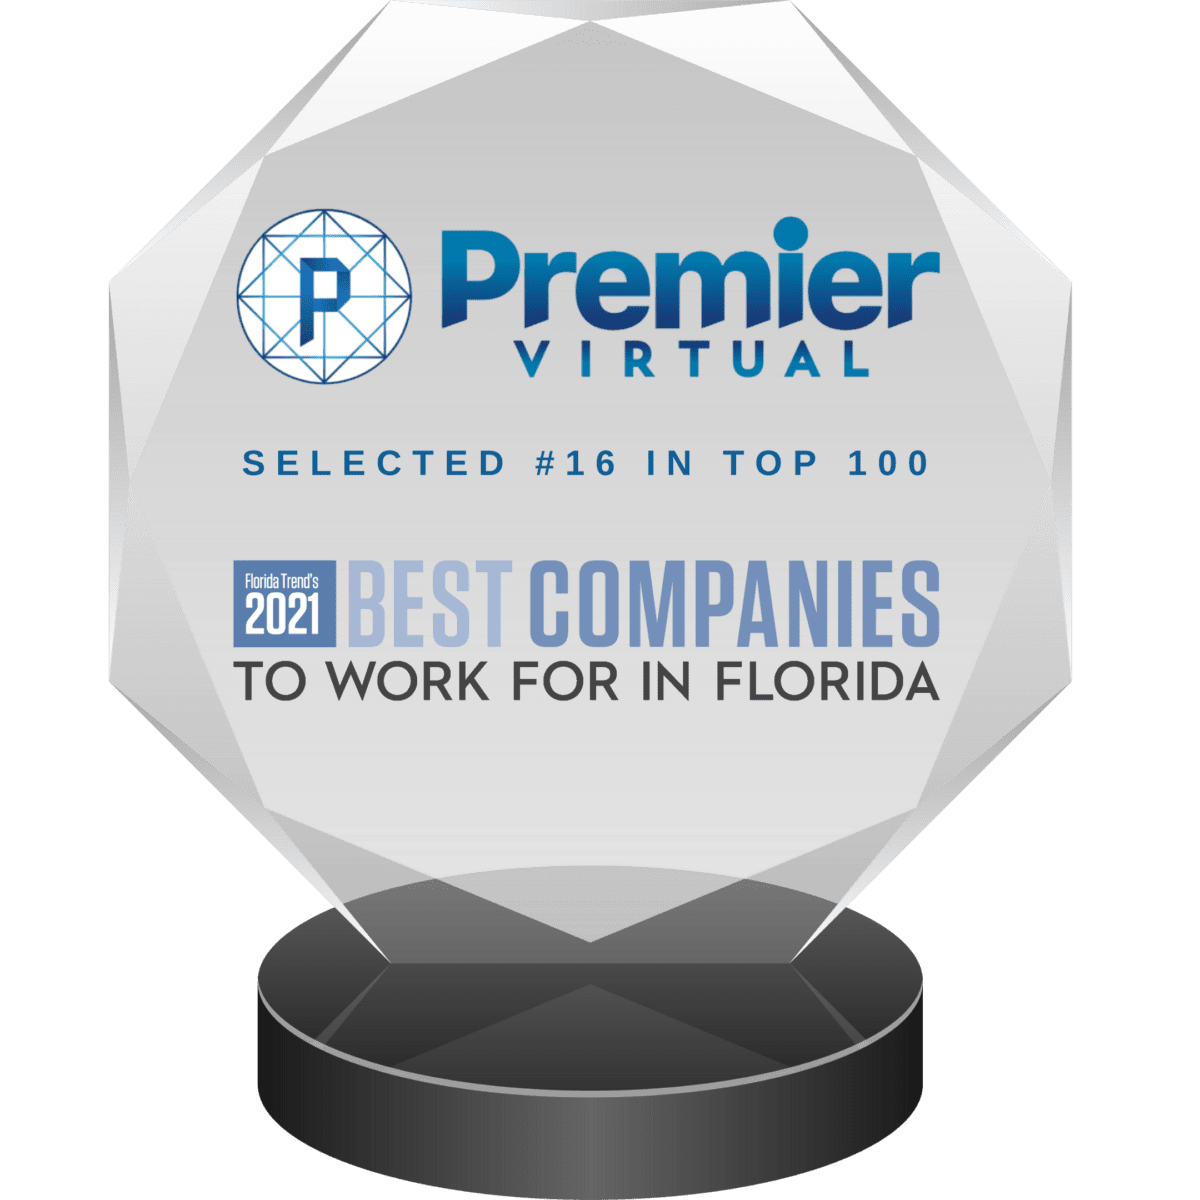 Premier Virtual - Best Companies to Work for in Florida 2021 by Florida Trend